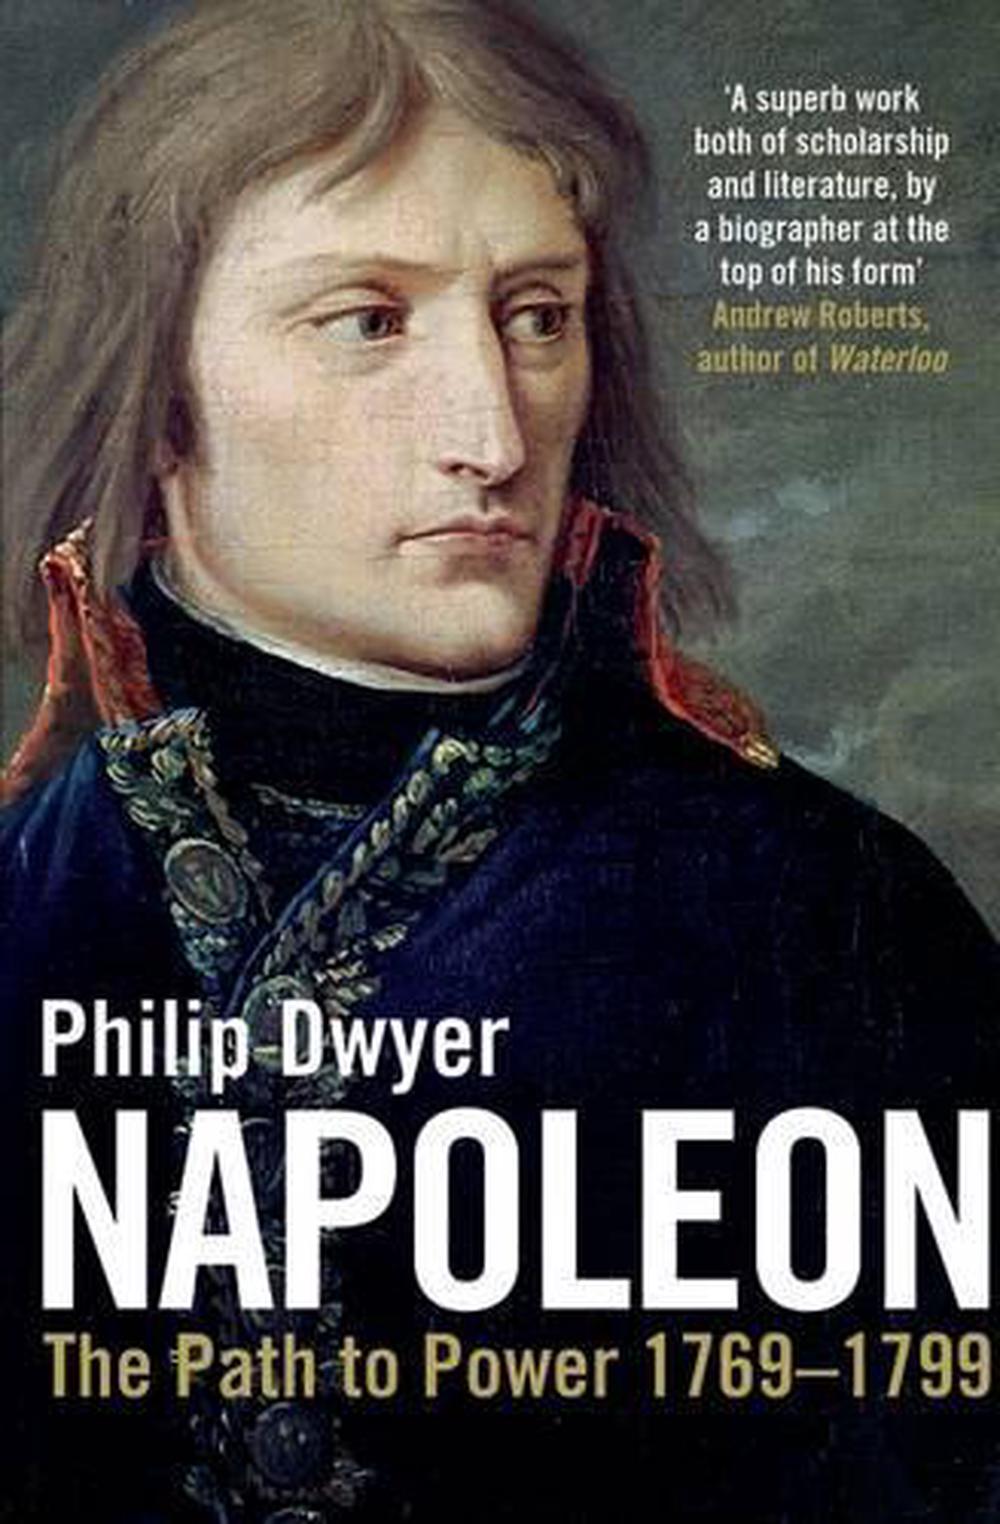 Napoleon The Path to Power 1769 1799 by Philip Dwyer (English) Paperback Book 9780747566779